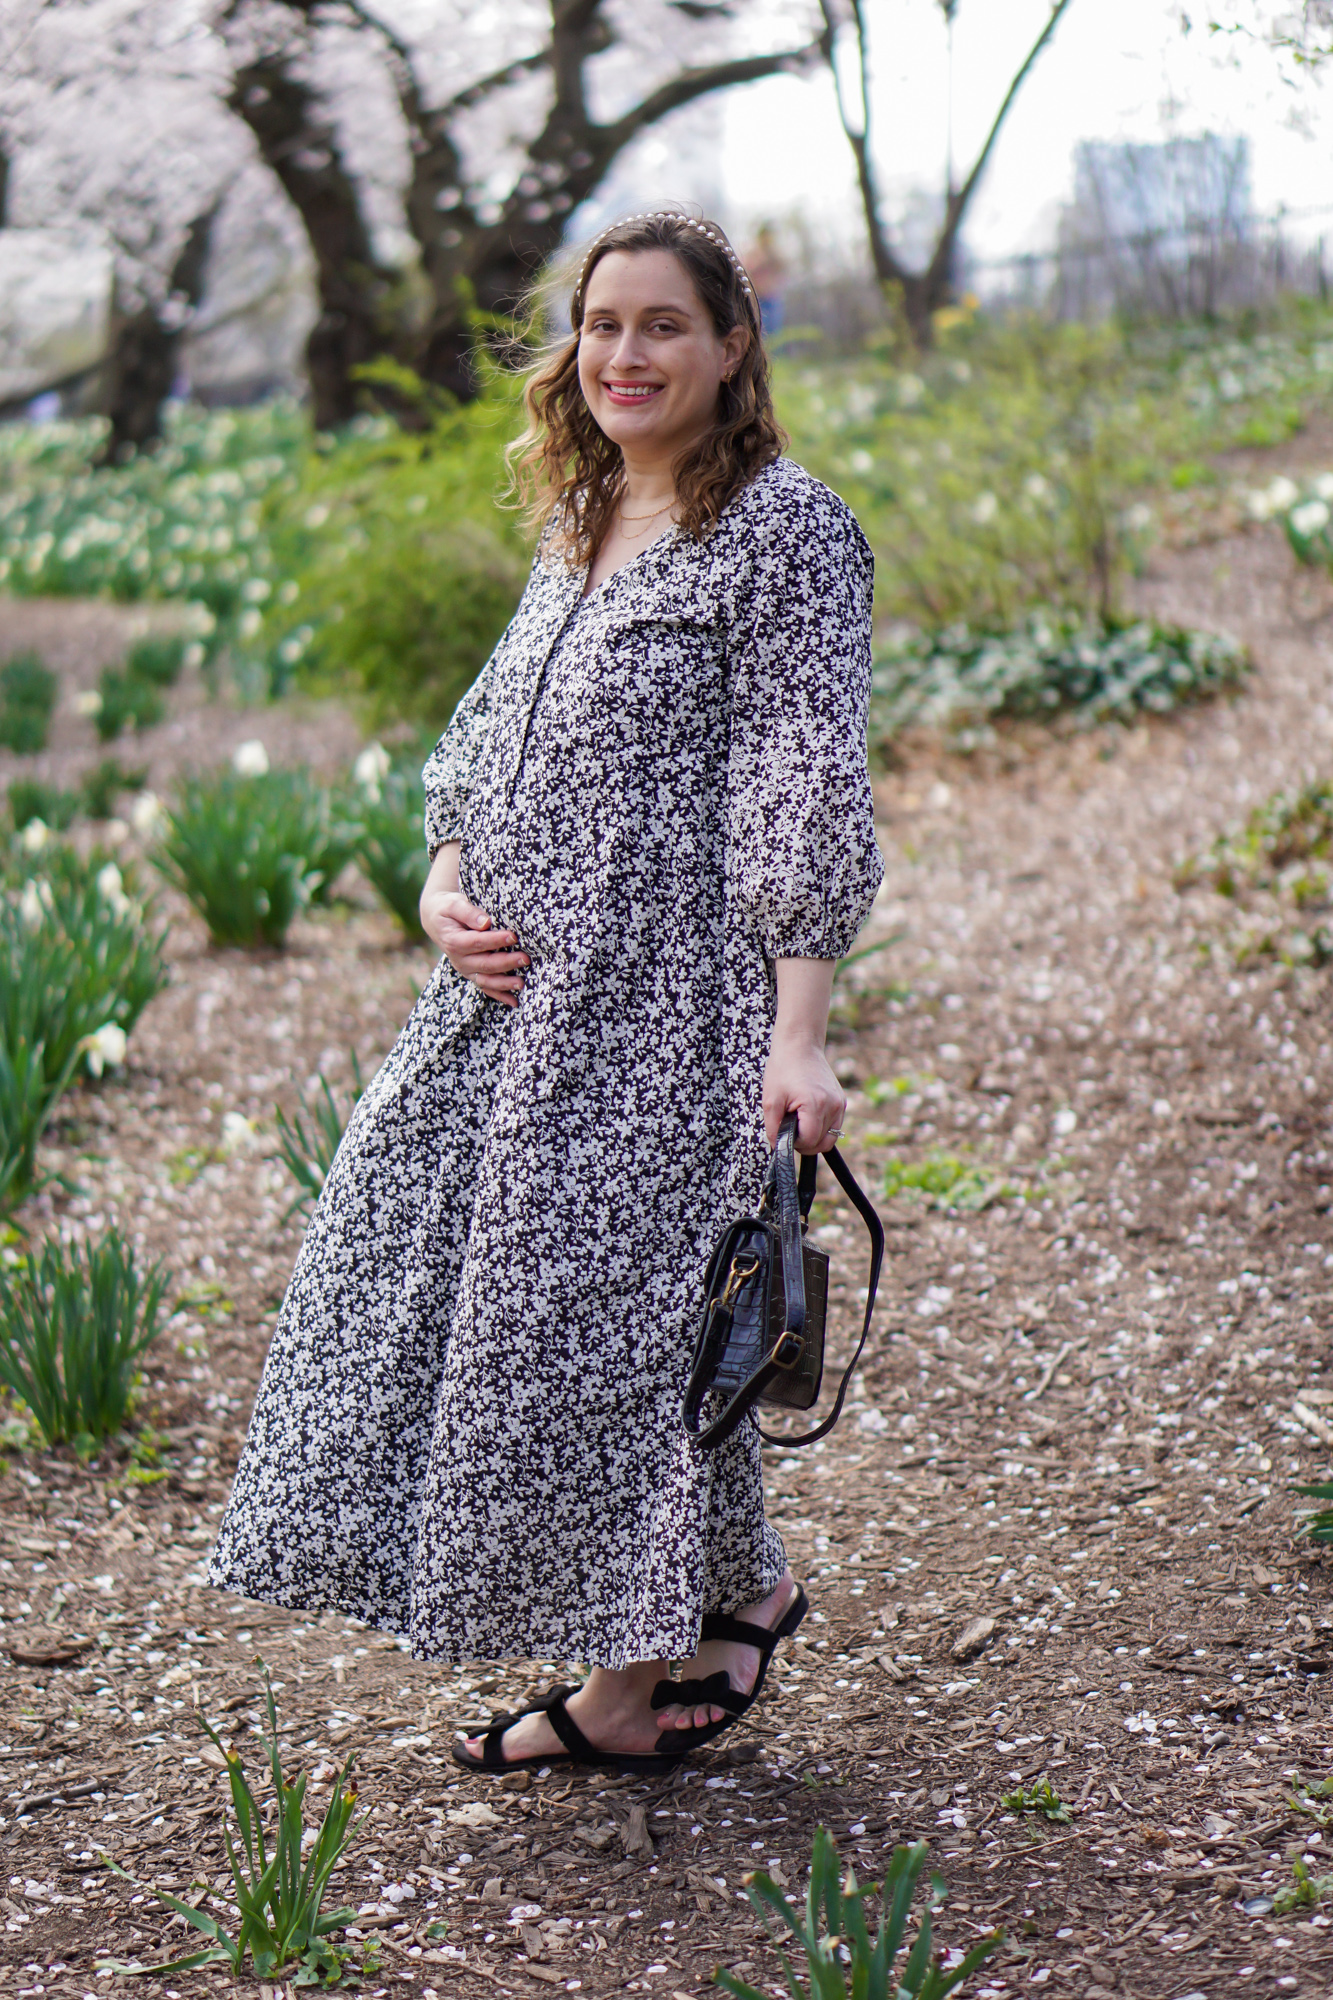 Maternity style for spring